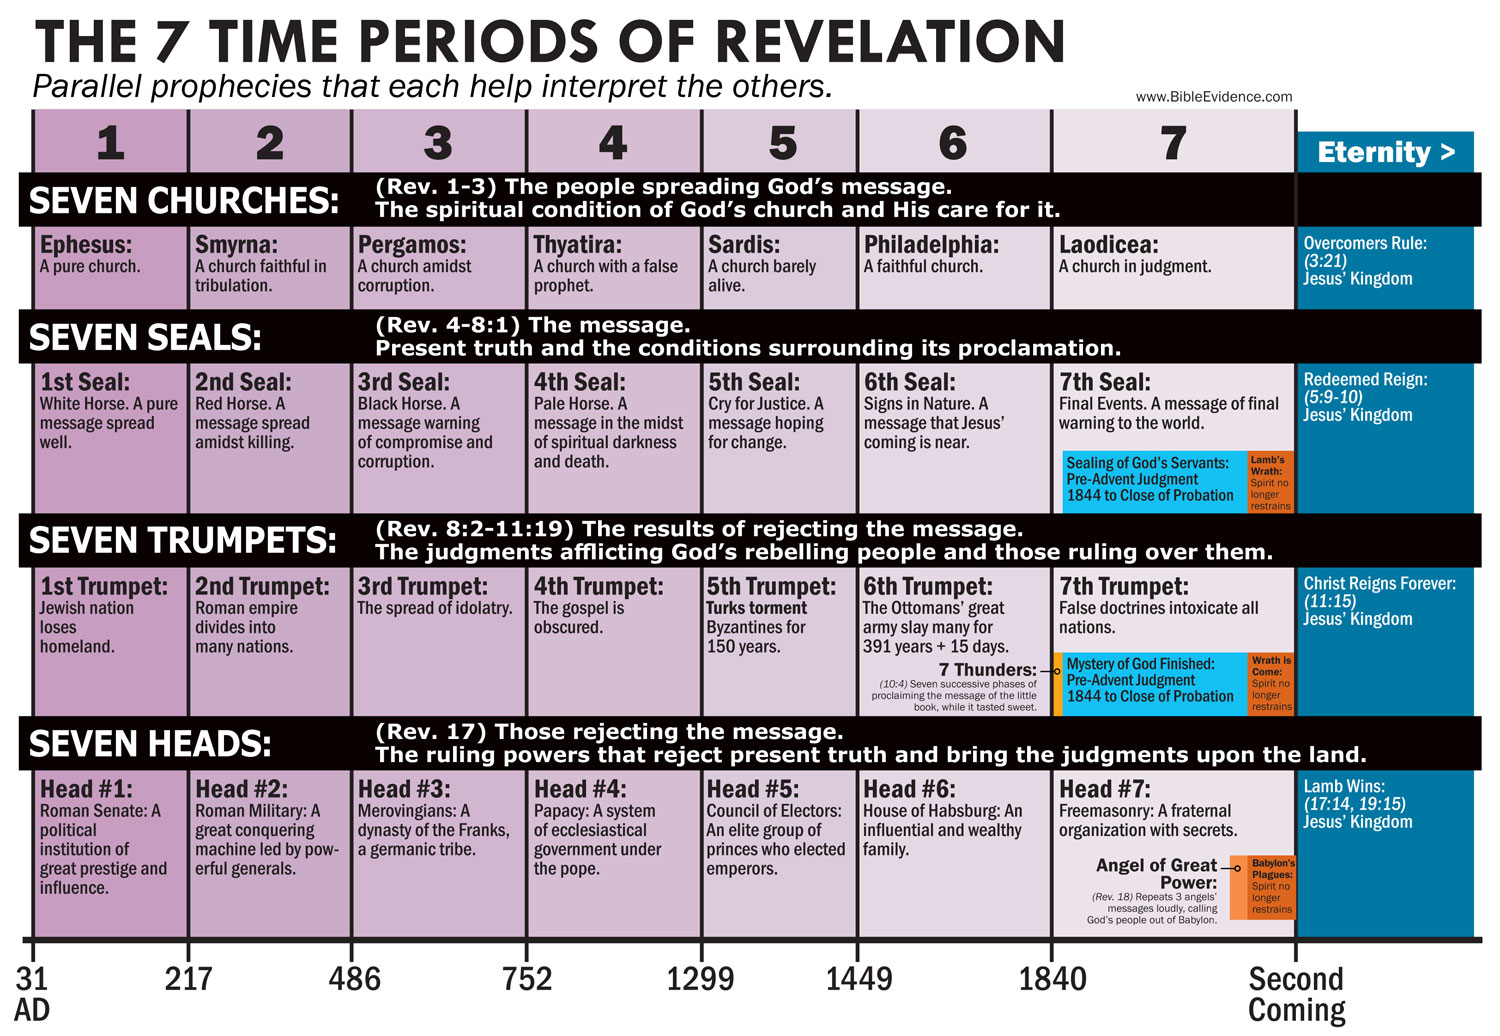 Comparison chart of the 7 time periods of Revelation